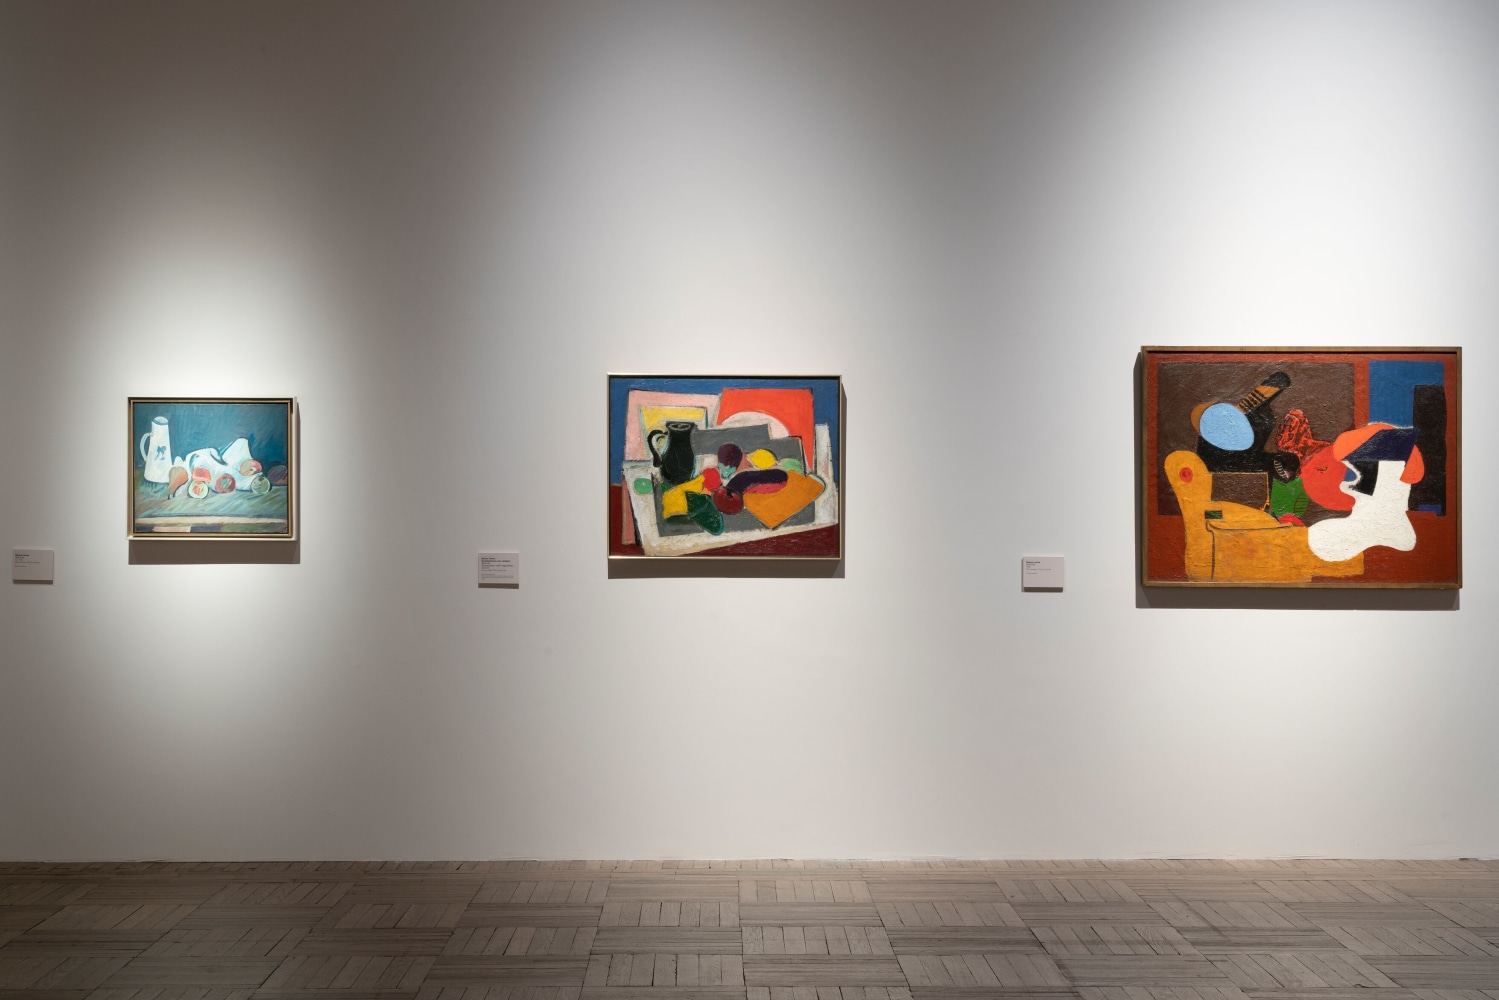 Installation photograph showing a Cubist-style paintings by Gorky from the mid-1930s